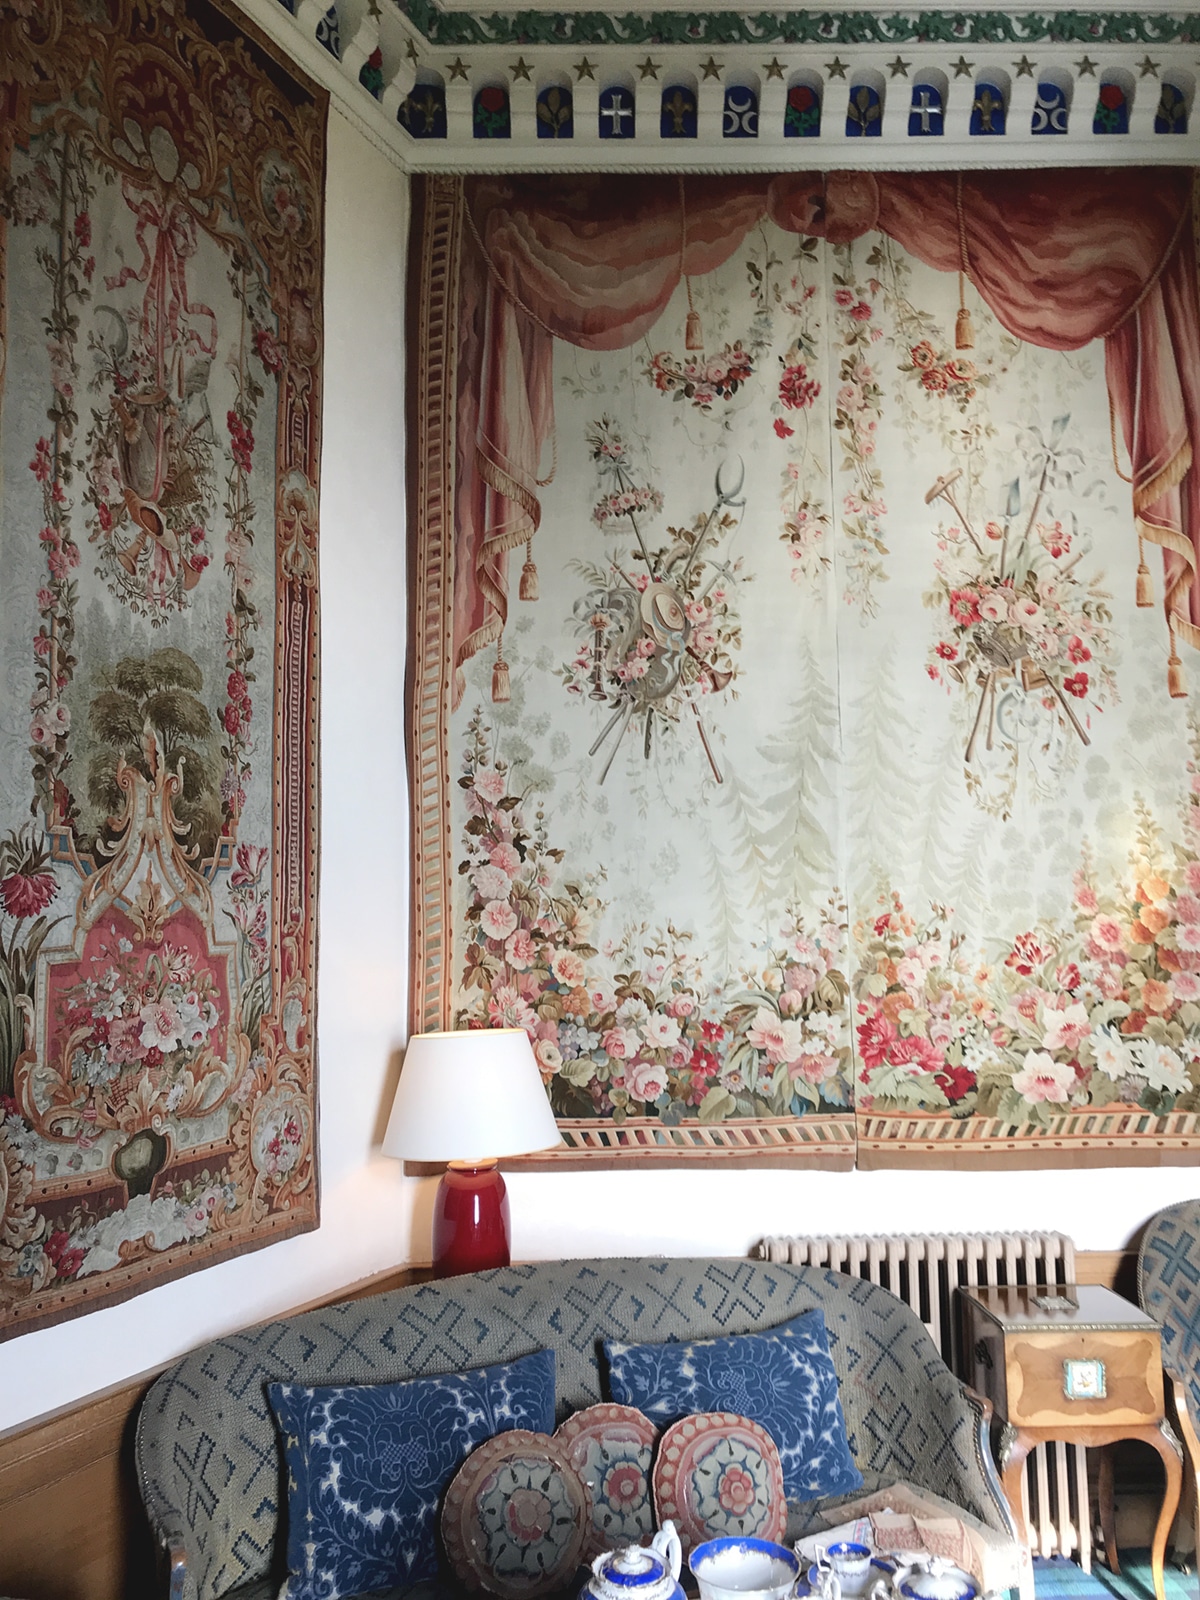 tapestry lined walls and amazing ceiling detail | dunrobin castle tour on coco kelley